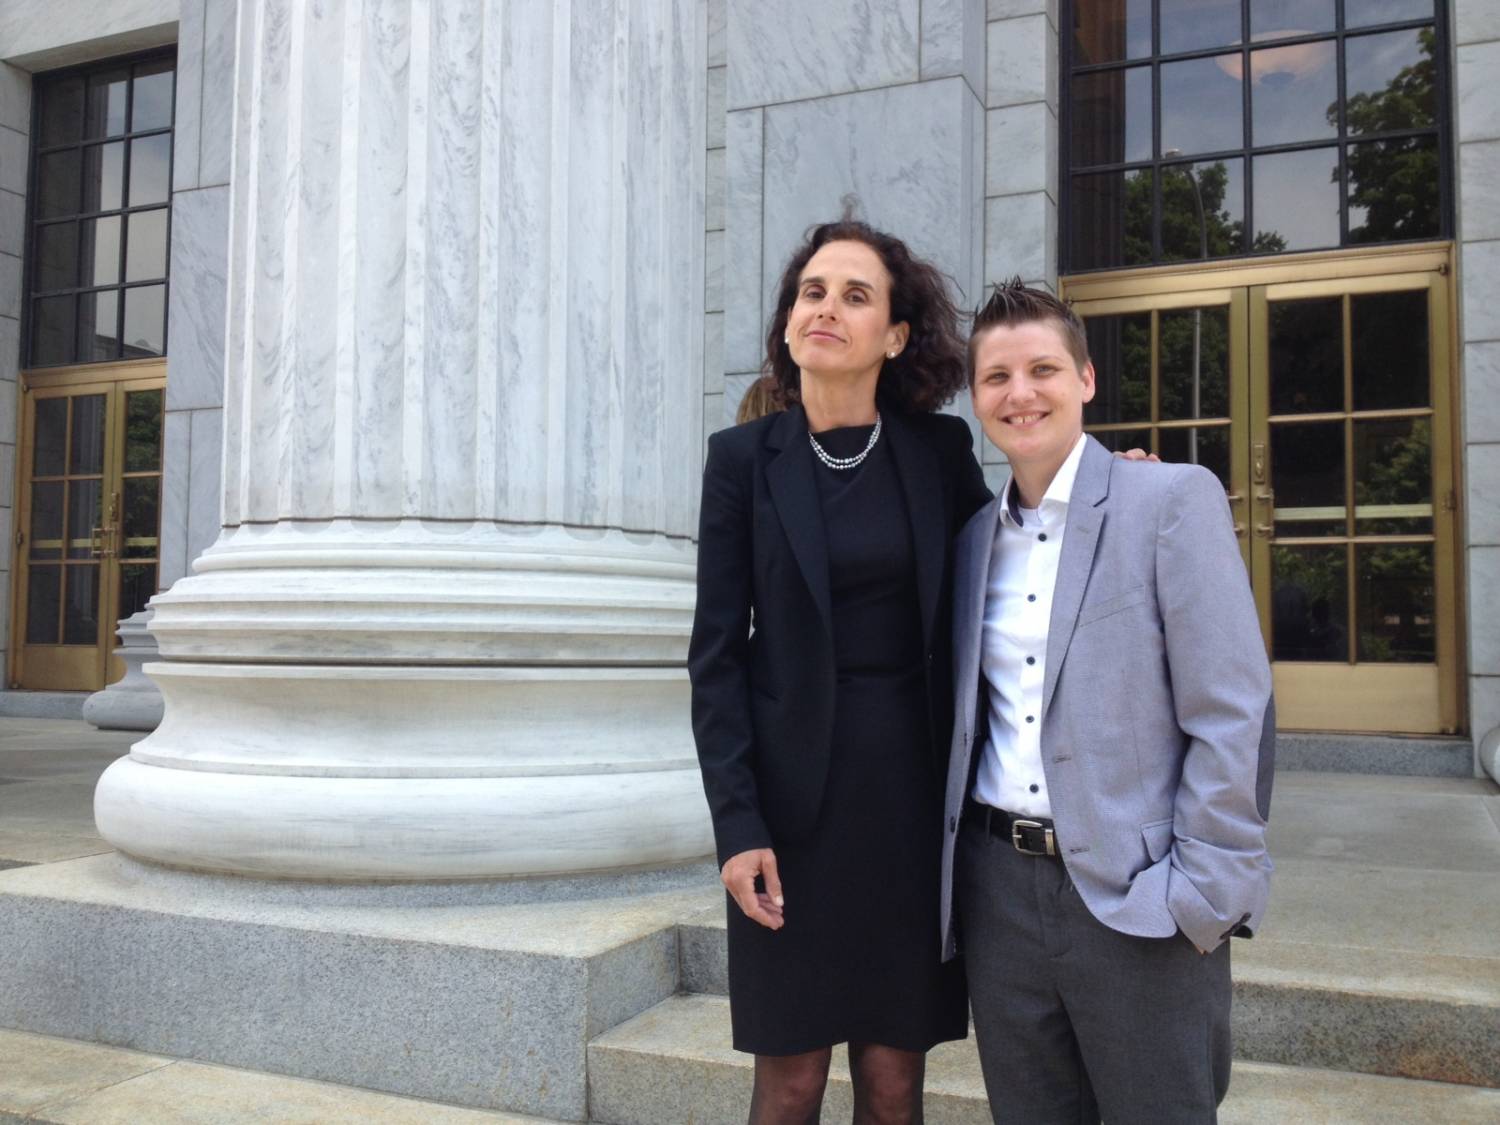 Susan Sommer, National Director of Constitutional Litigation at Lambda Legal (L), with Lambda Legal client Brooke B. (R).